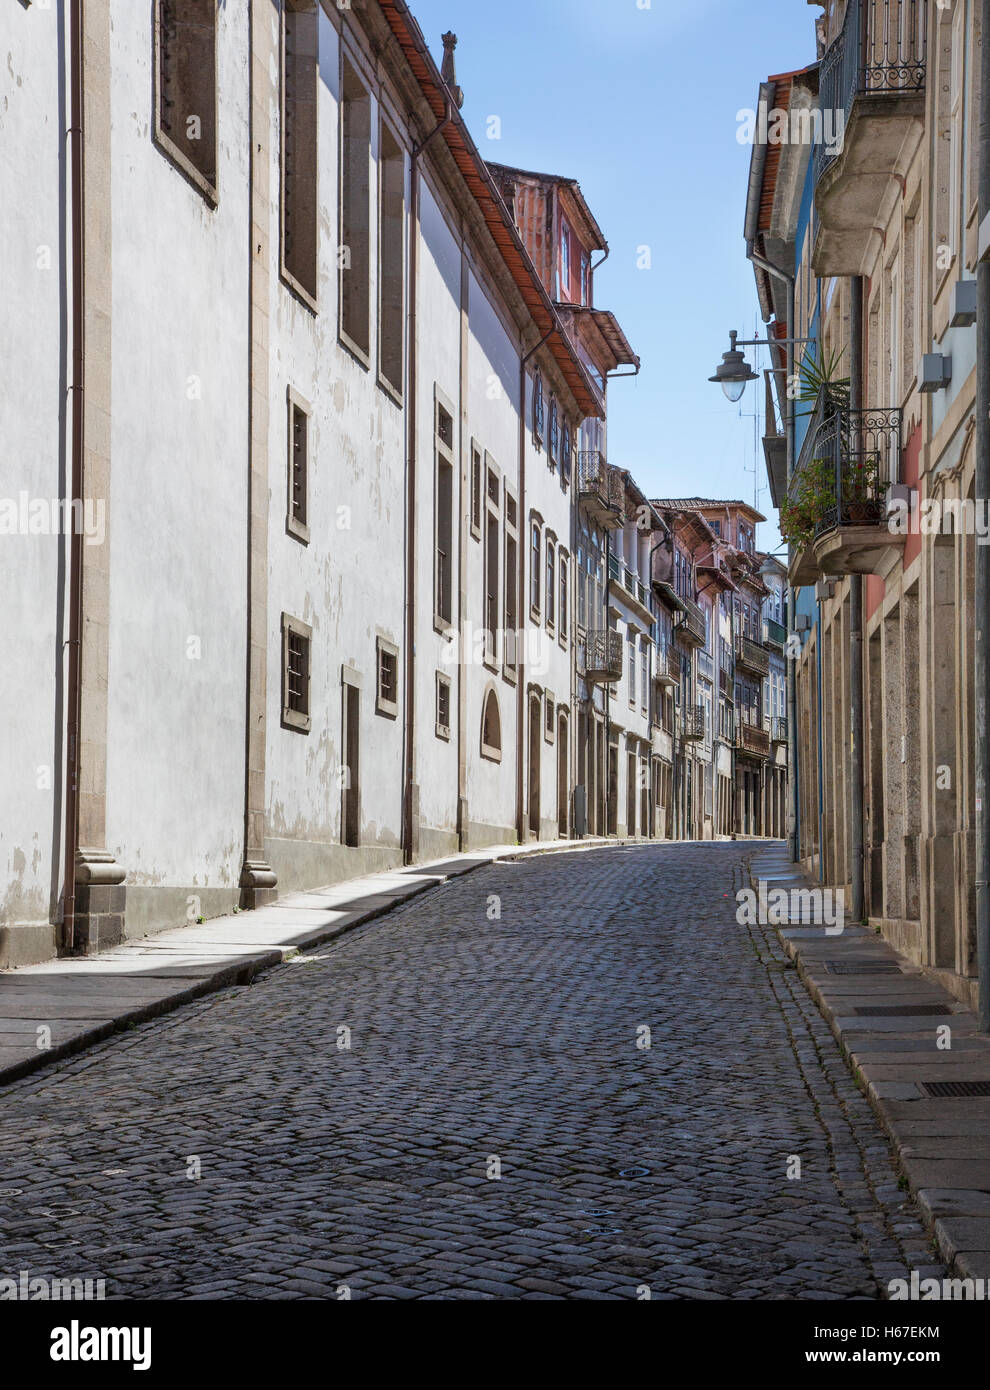 View along an old street in Braga, Portugal Stock Photo